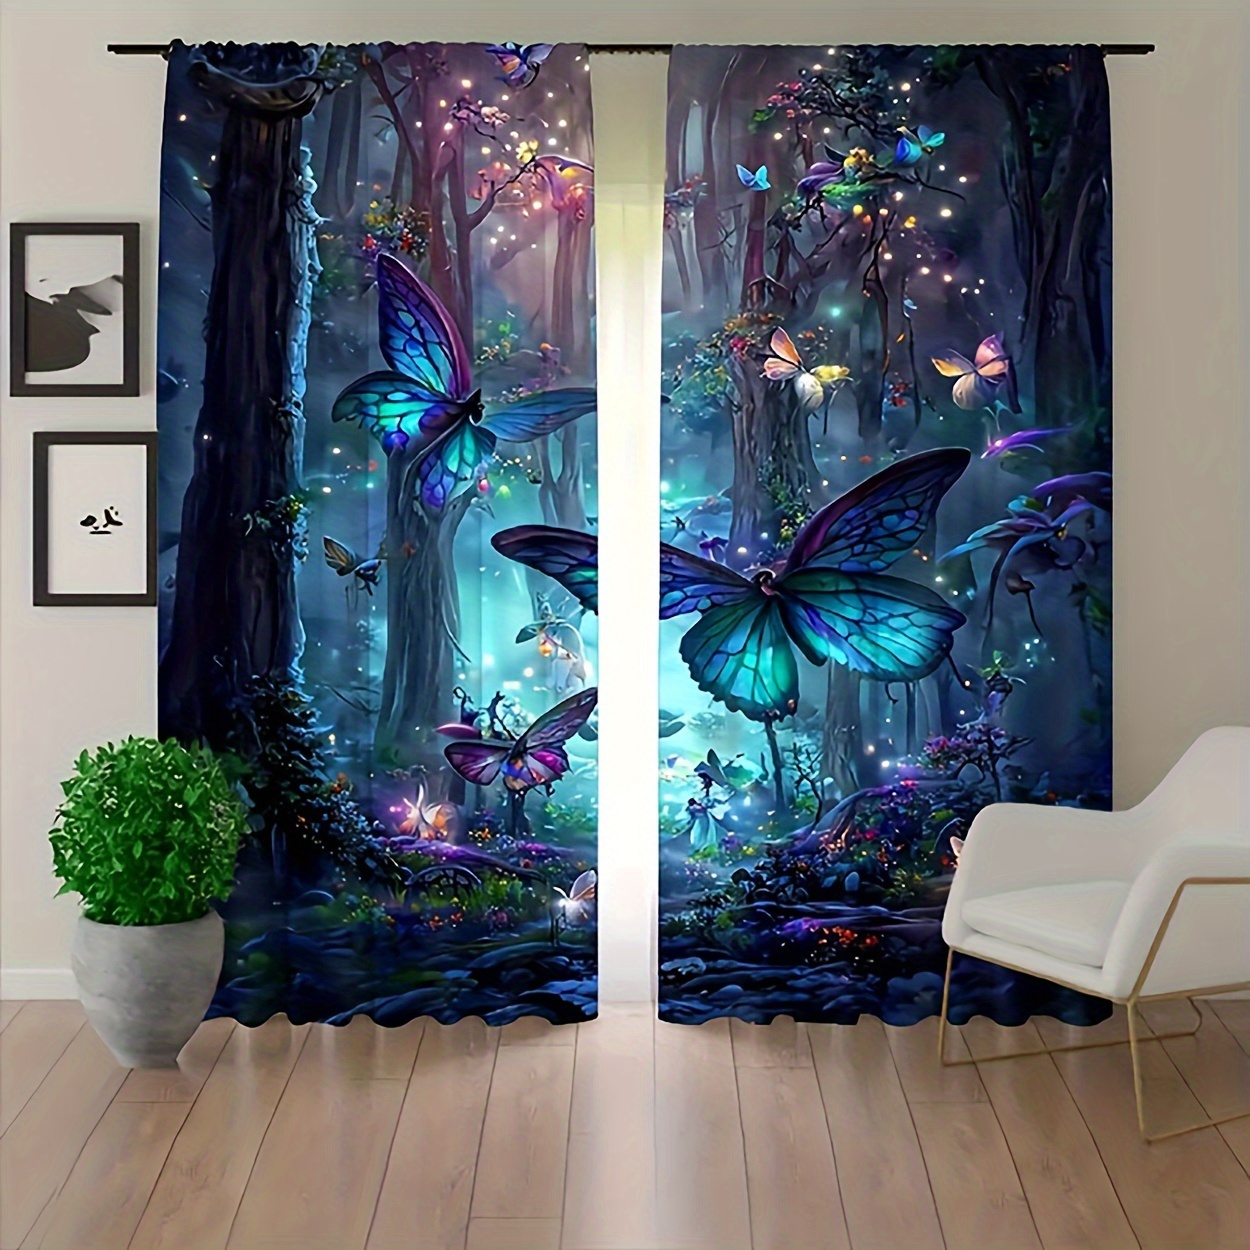 

2pcs Butterfly Forest Prints Curtain Panels, Blackout Easy-care Privacy Window Drapes Set, Rod Pocket Window Treatments For Bedroom, Living Room, Dormitory, Office, Home Decoration